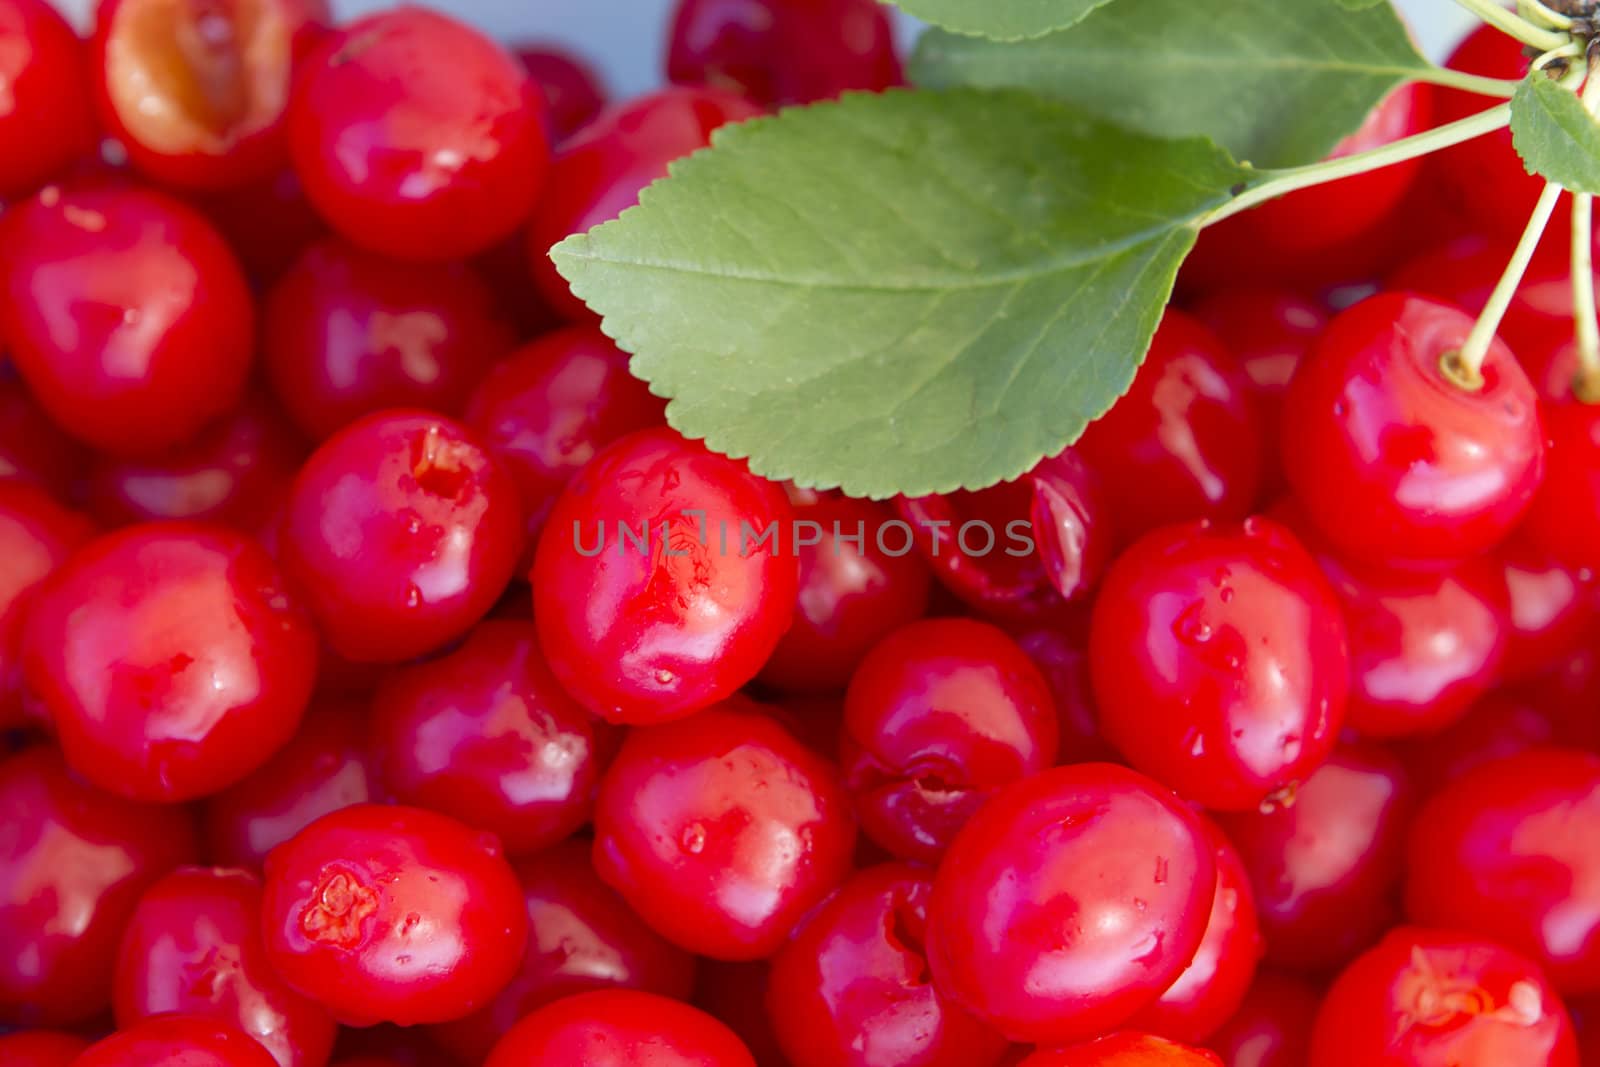 Pitted sour cherries with complimenting cherry leaf